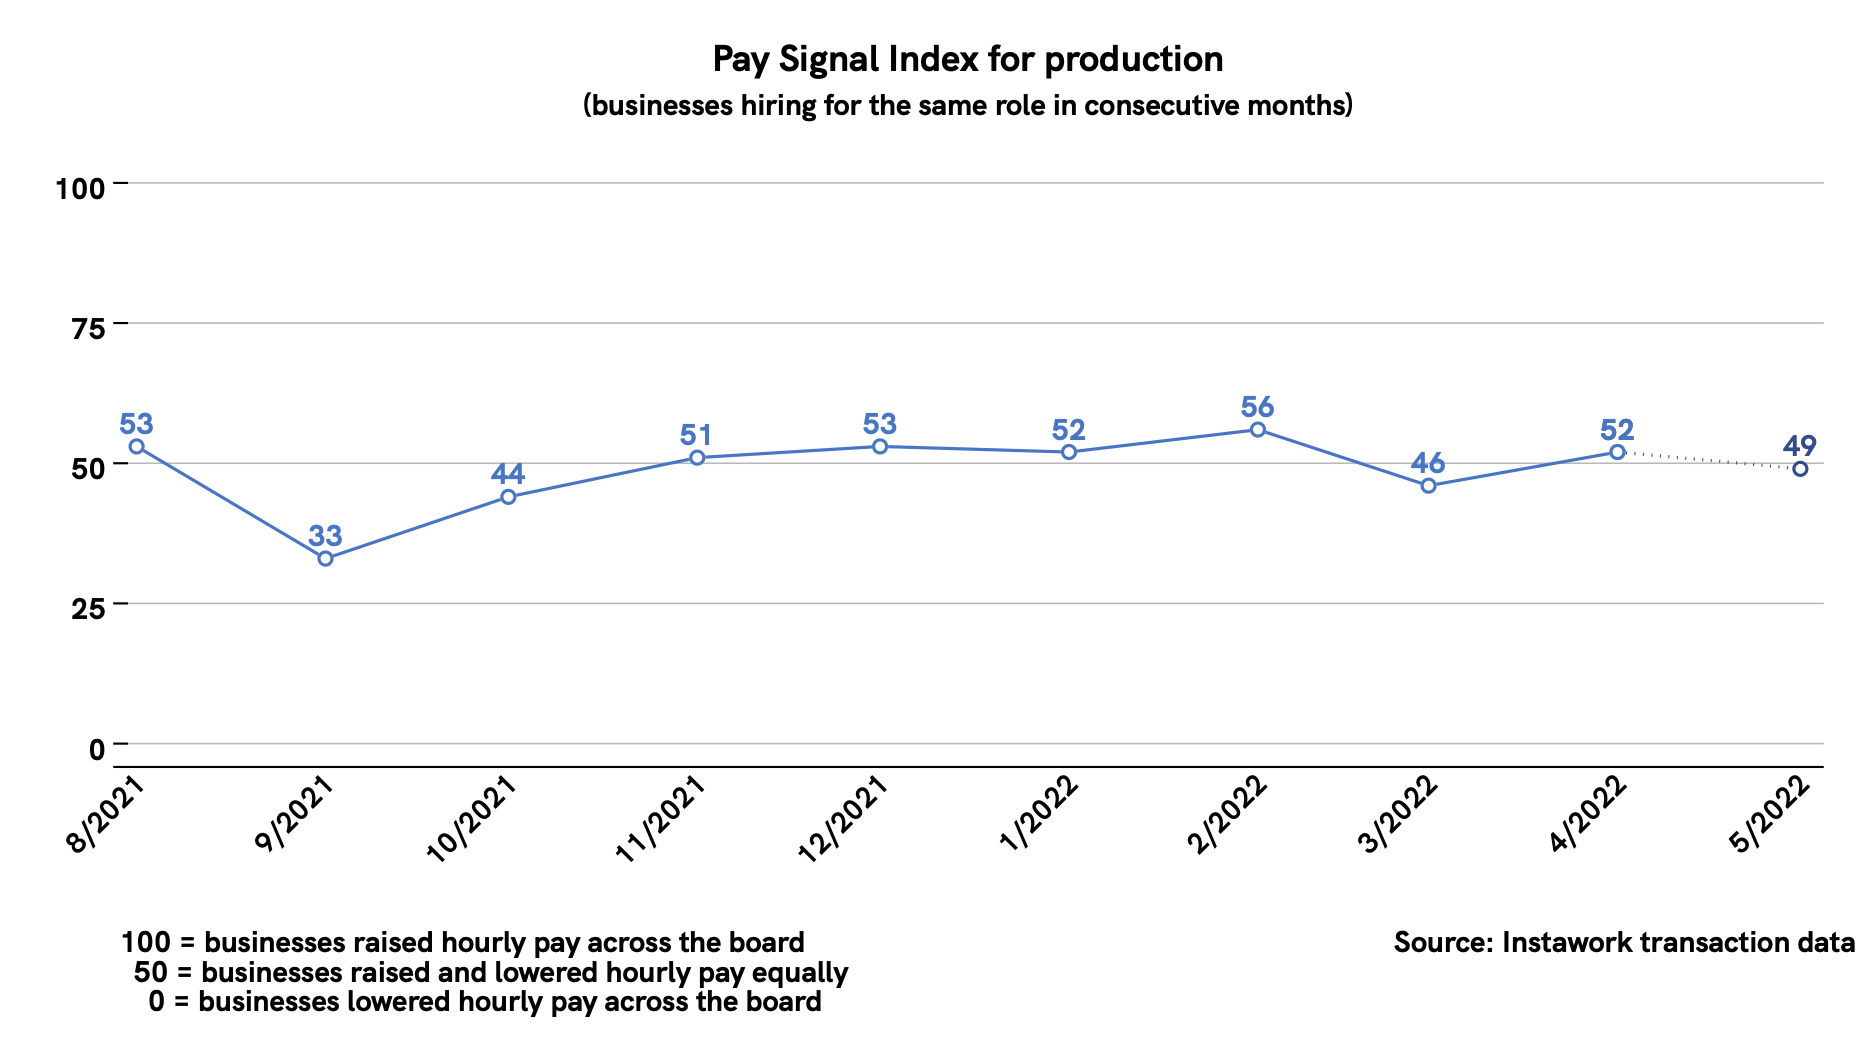 2 May 2022 Pay Signal Index for production